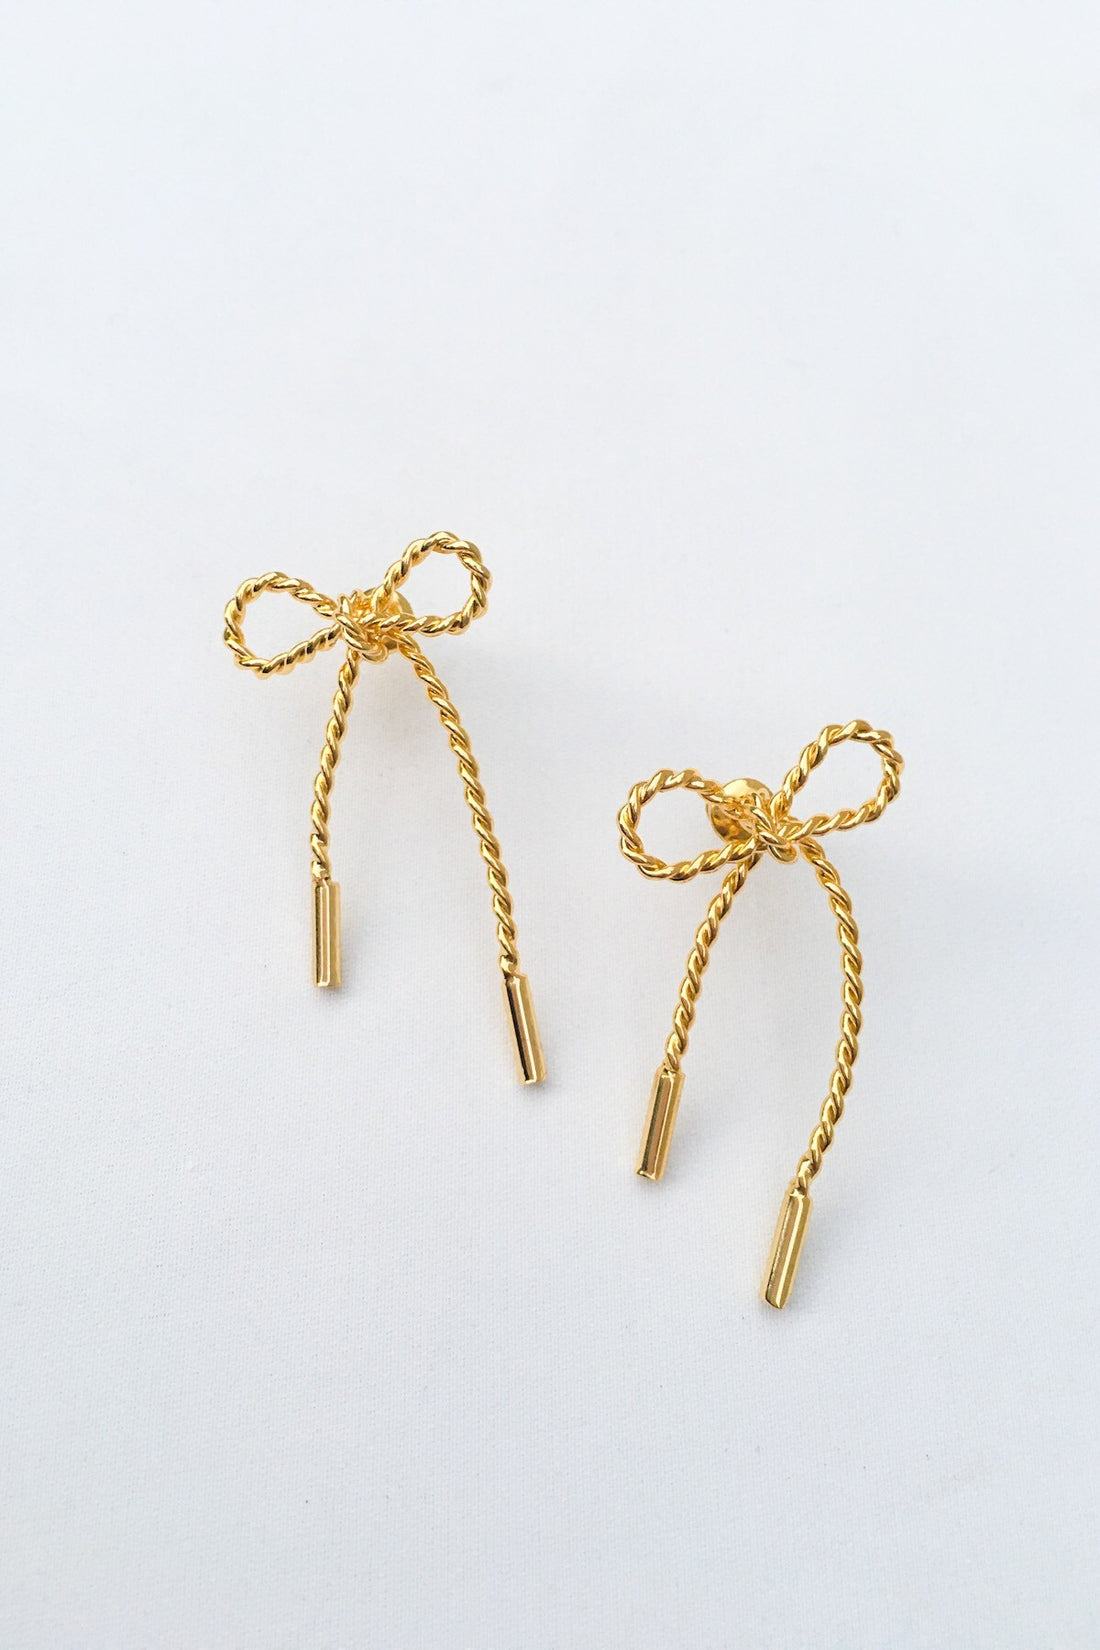 SKYE San Francisco SF California shop ethical sustainable modern minimalist quality women jewelry Luis 18K Gold Bow Earrings 3